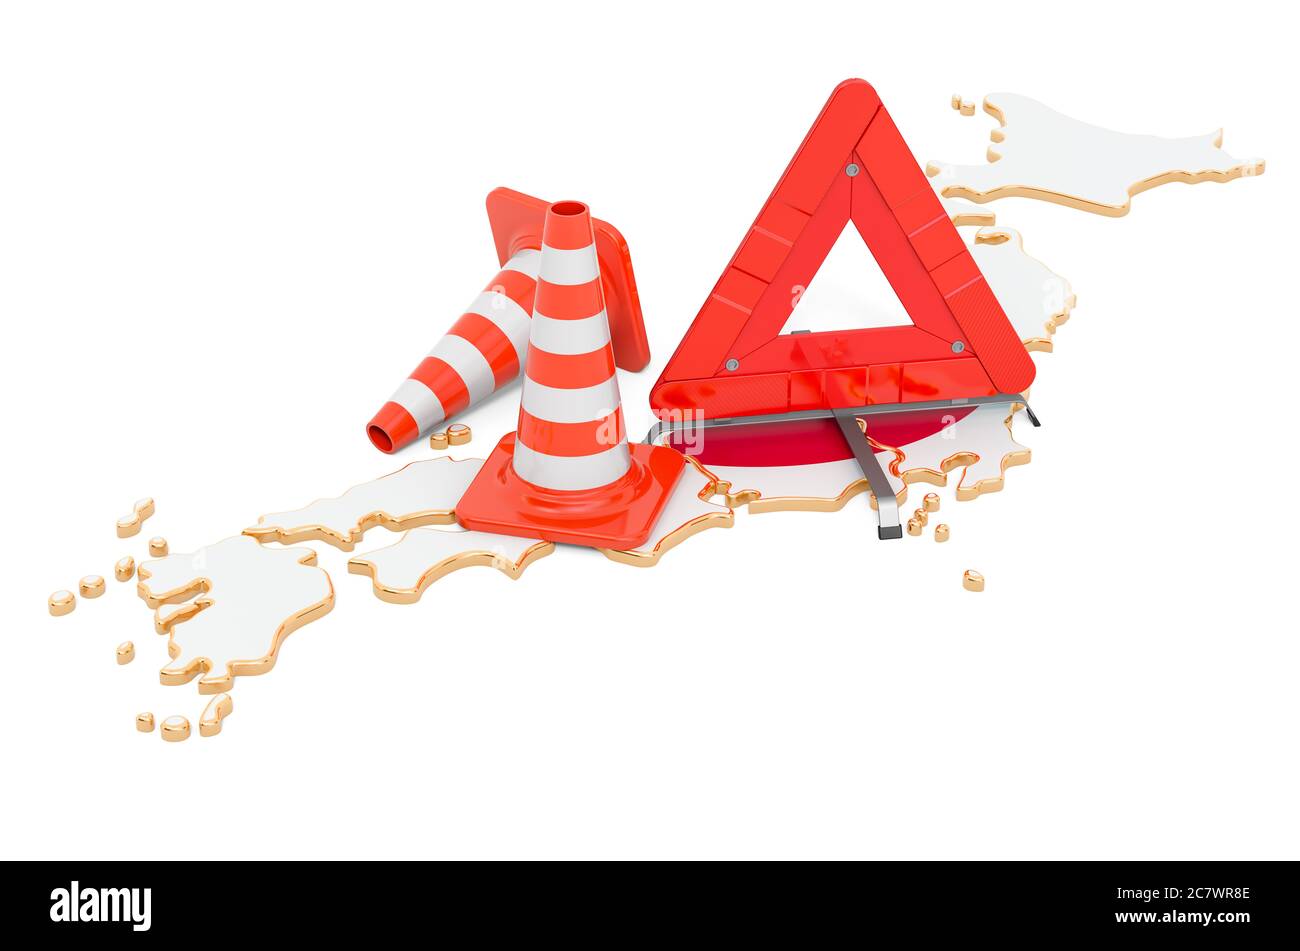 Japanese map with traffic cones and warning triangle, 3D rendering isolated on white background Stock Photo